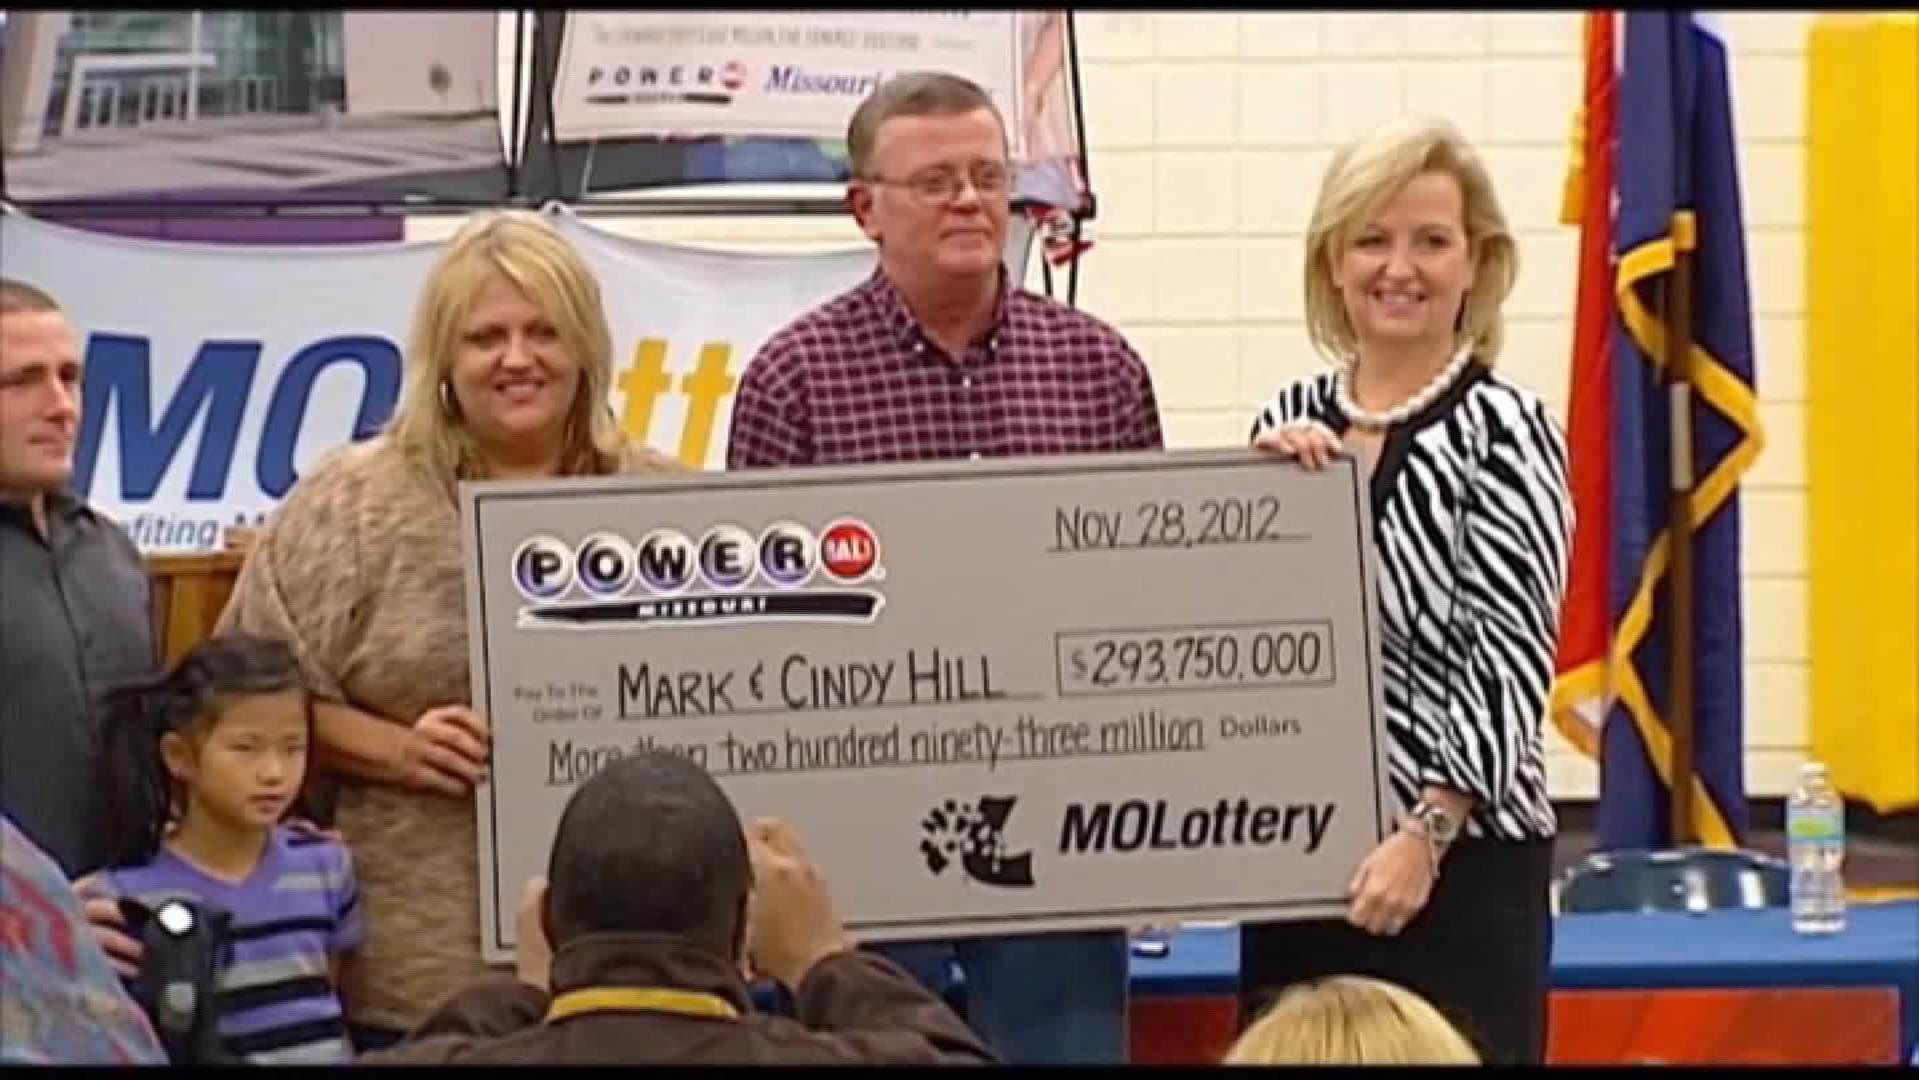 Mark and Cindy Hill built a generous gift for their small town in Missouri.